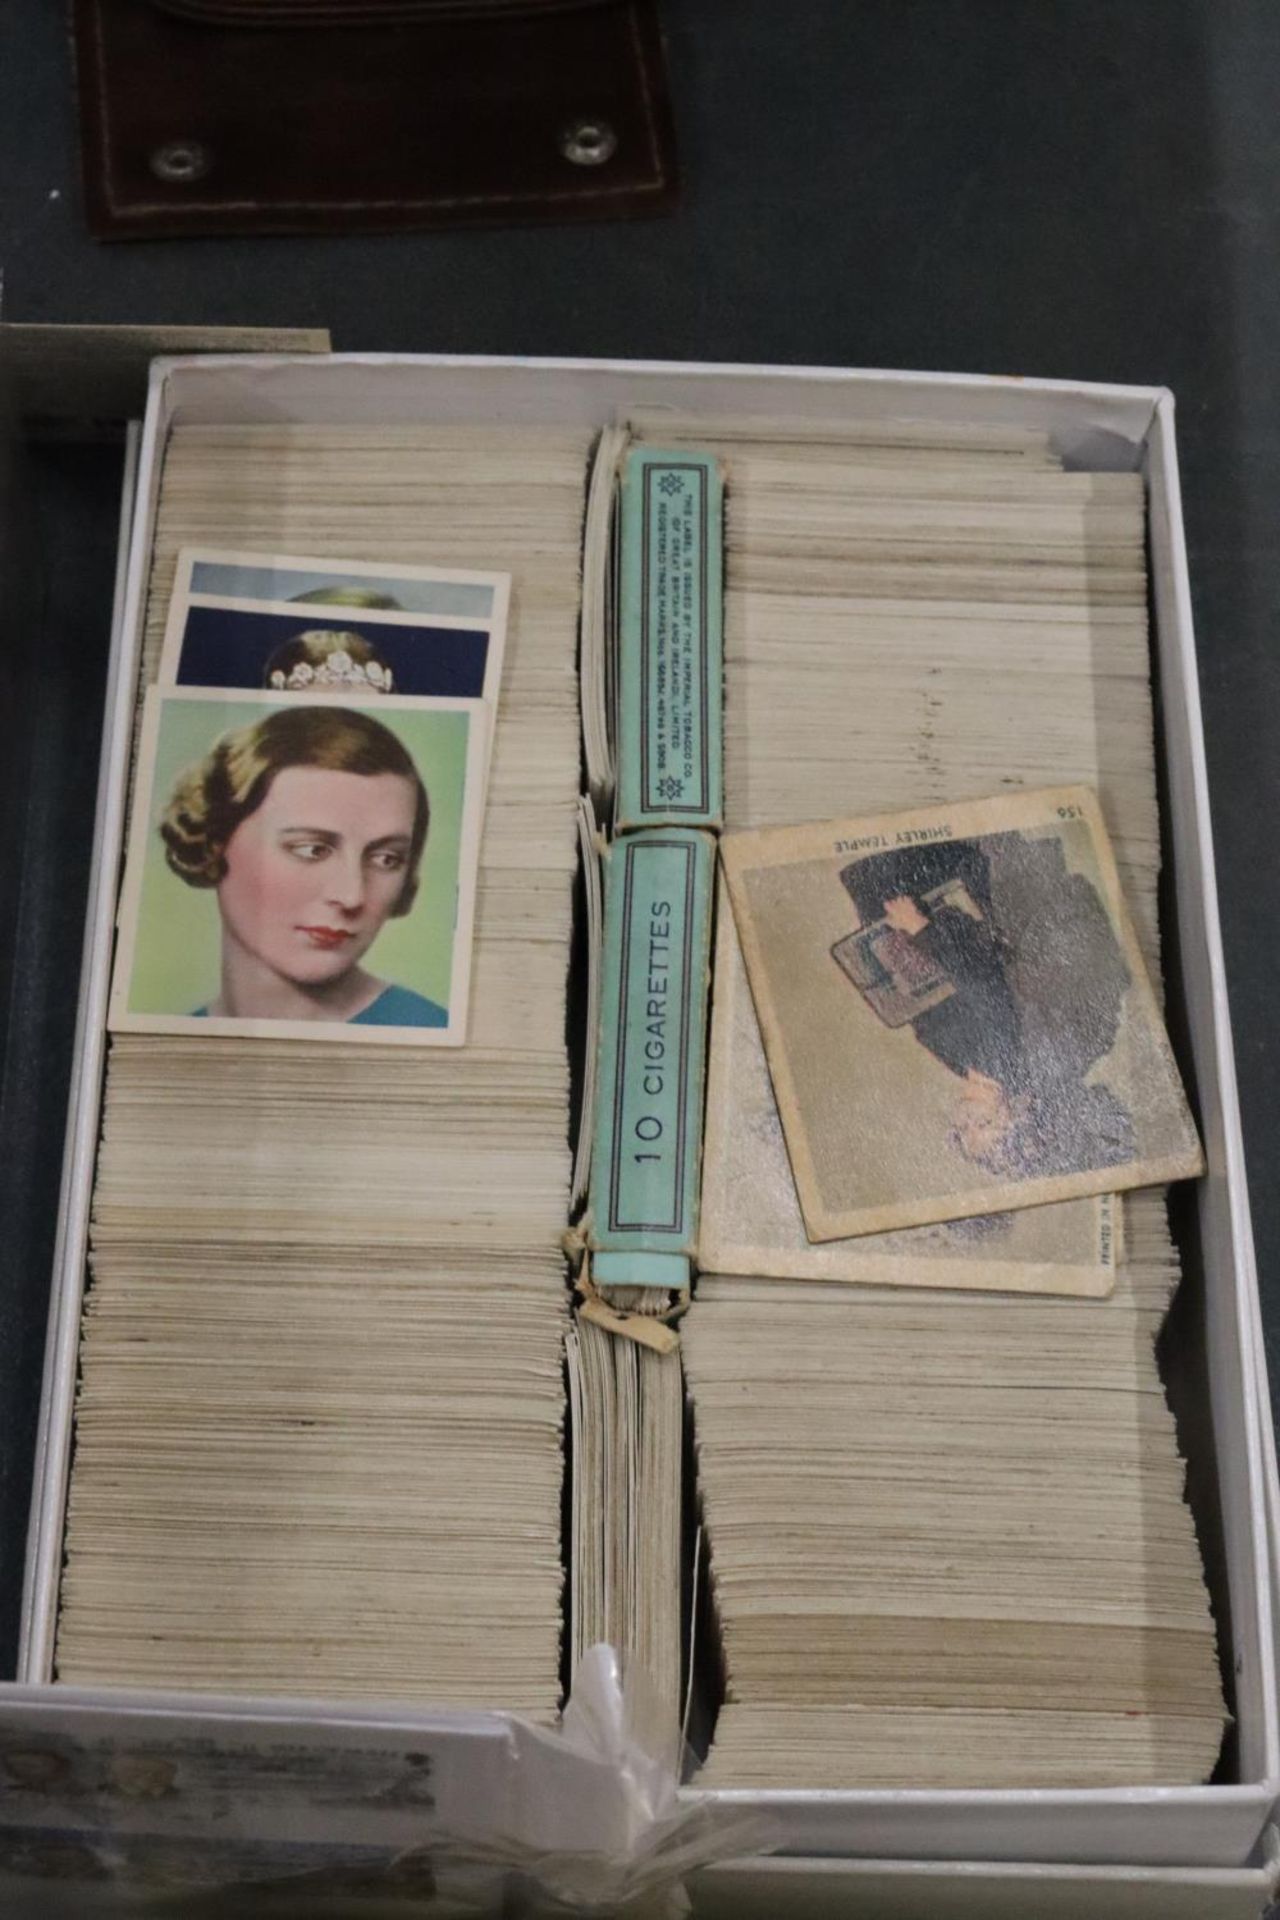 A LARGE QUANTITY OF LOOSE CIGARETTE CARDS TOGETHER WITH A VINTAGE ALBUM - Image 9 of 10